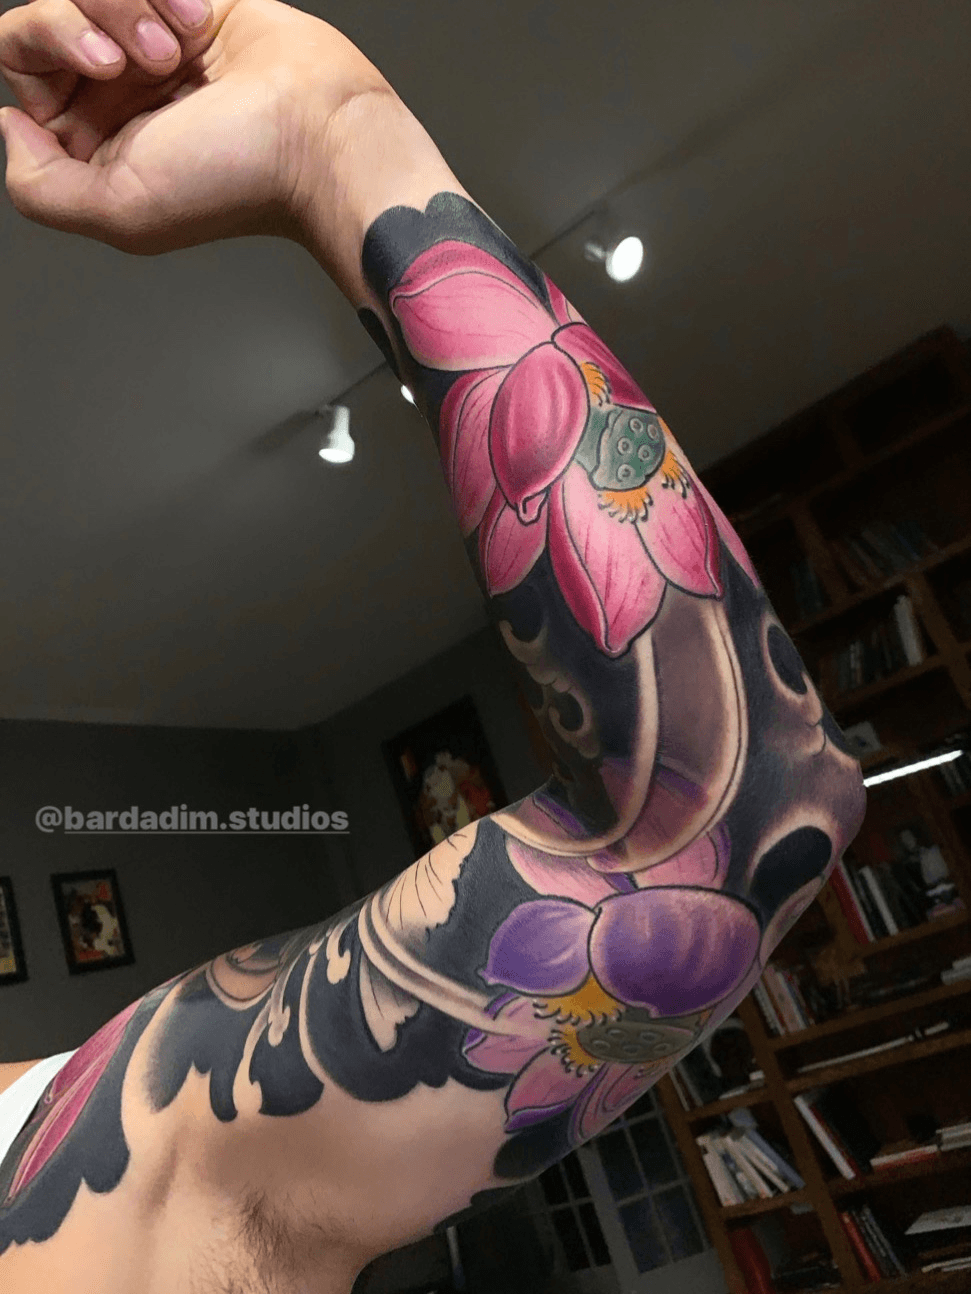 Wow This has to be one of the best lotus flower tattoos Ive ever seen  Curator japaneseink Artist maxtitanic irezumi  Instagram